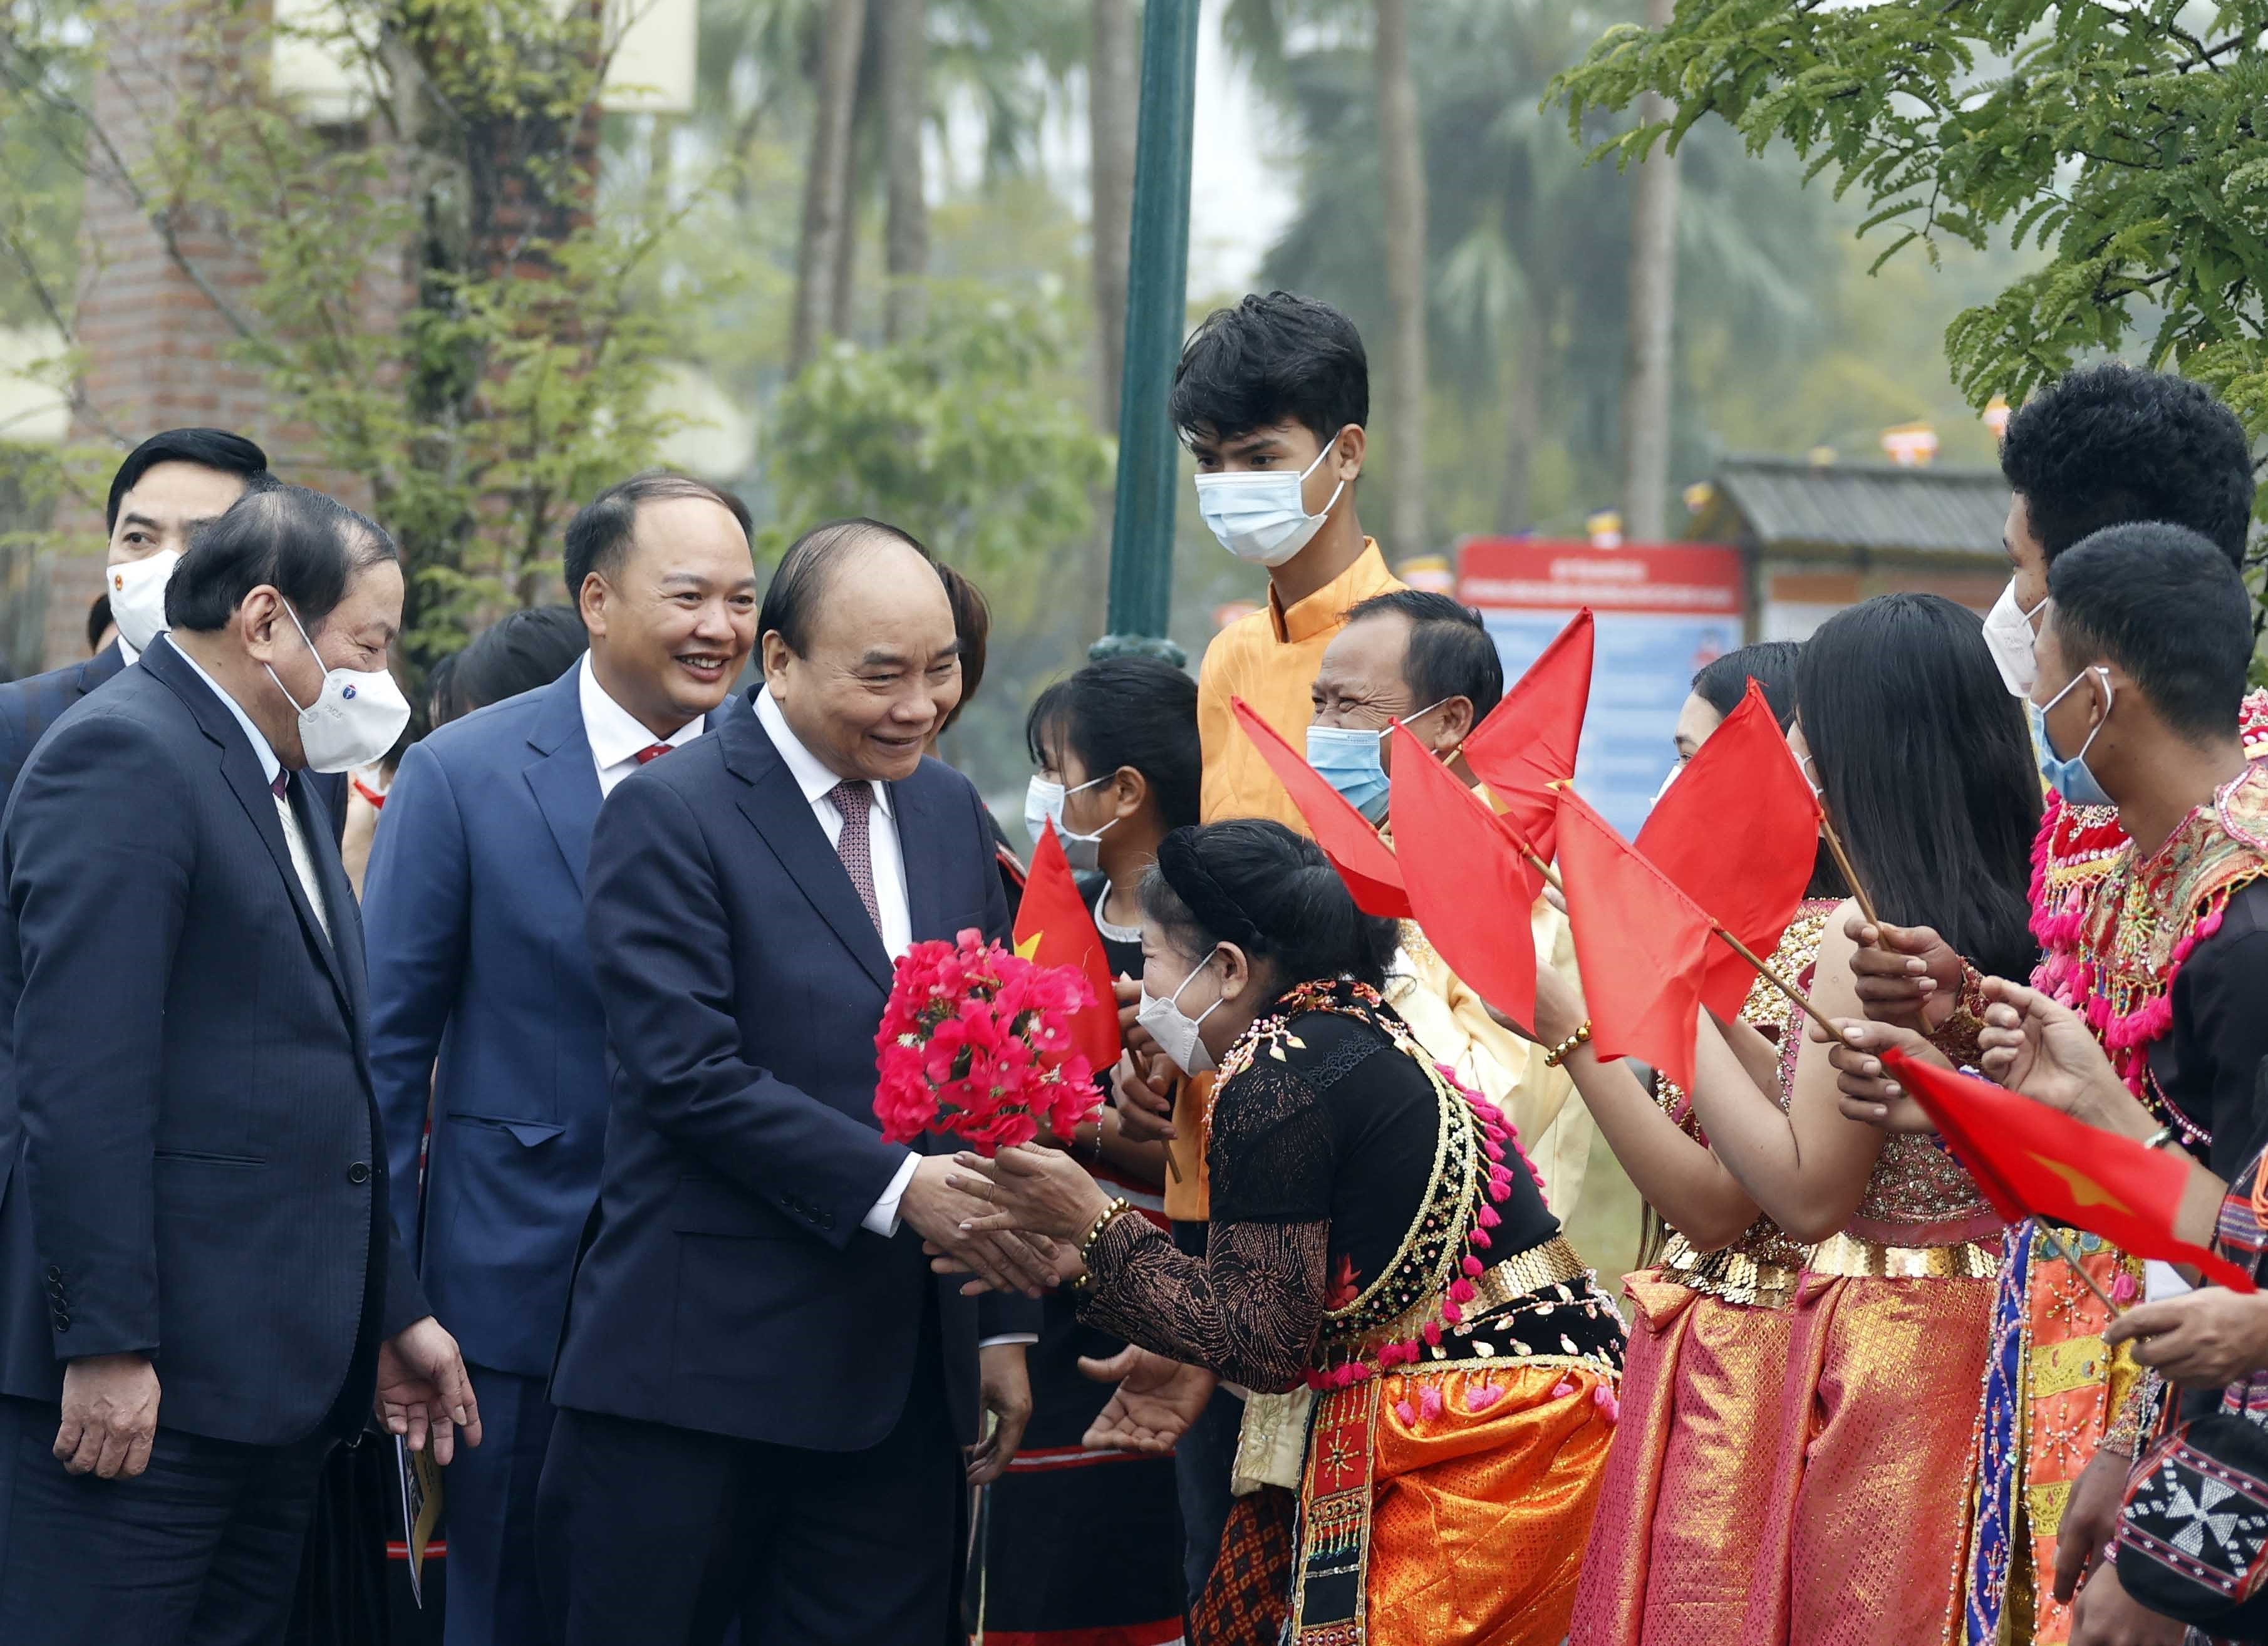 State leader joins ethnic groups in spring festival hinh anh 1